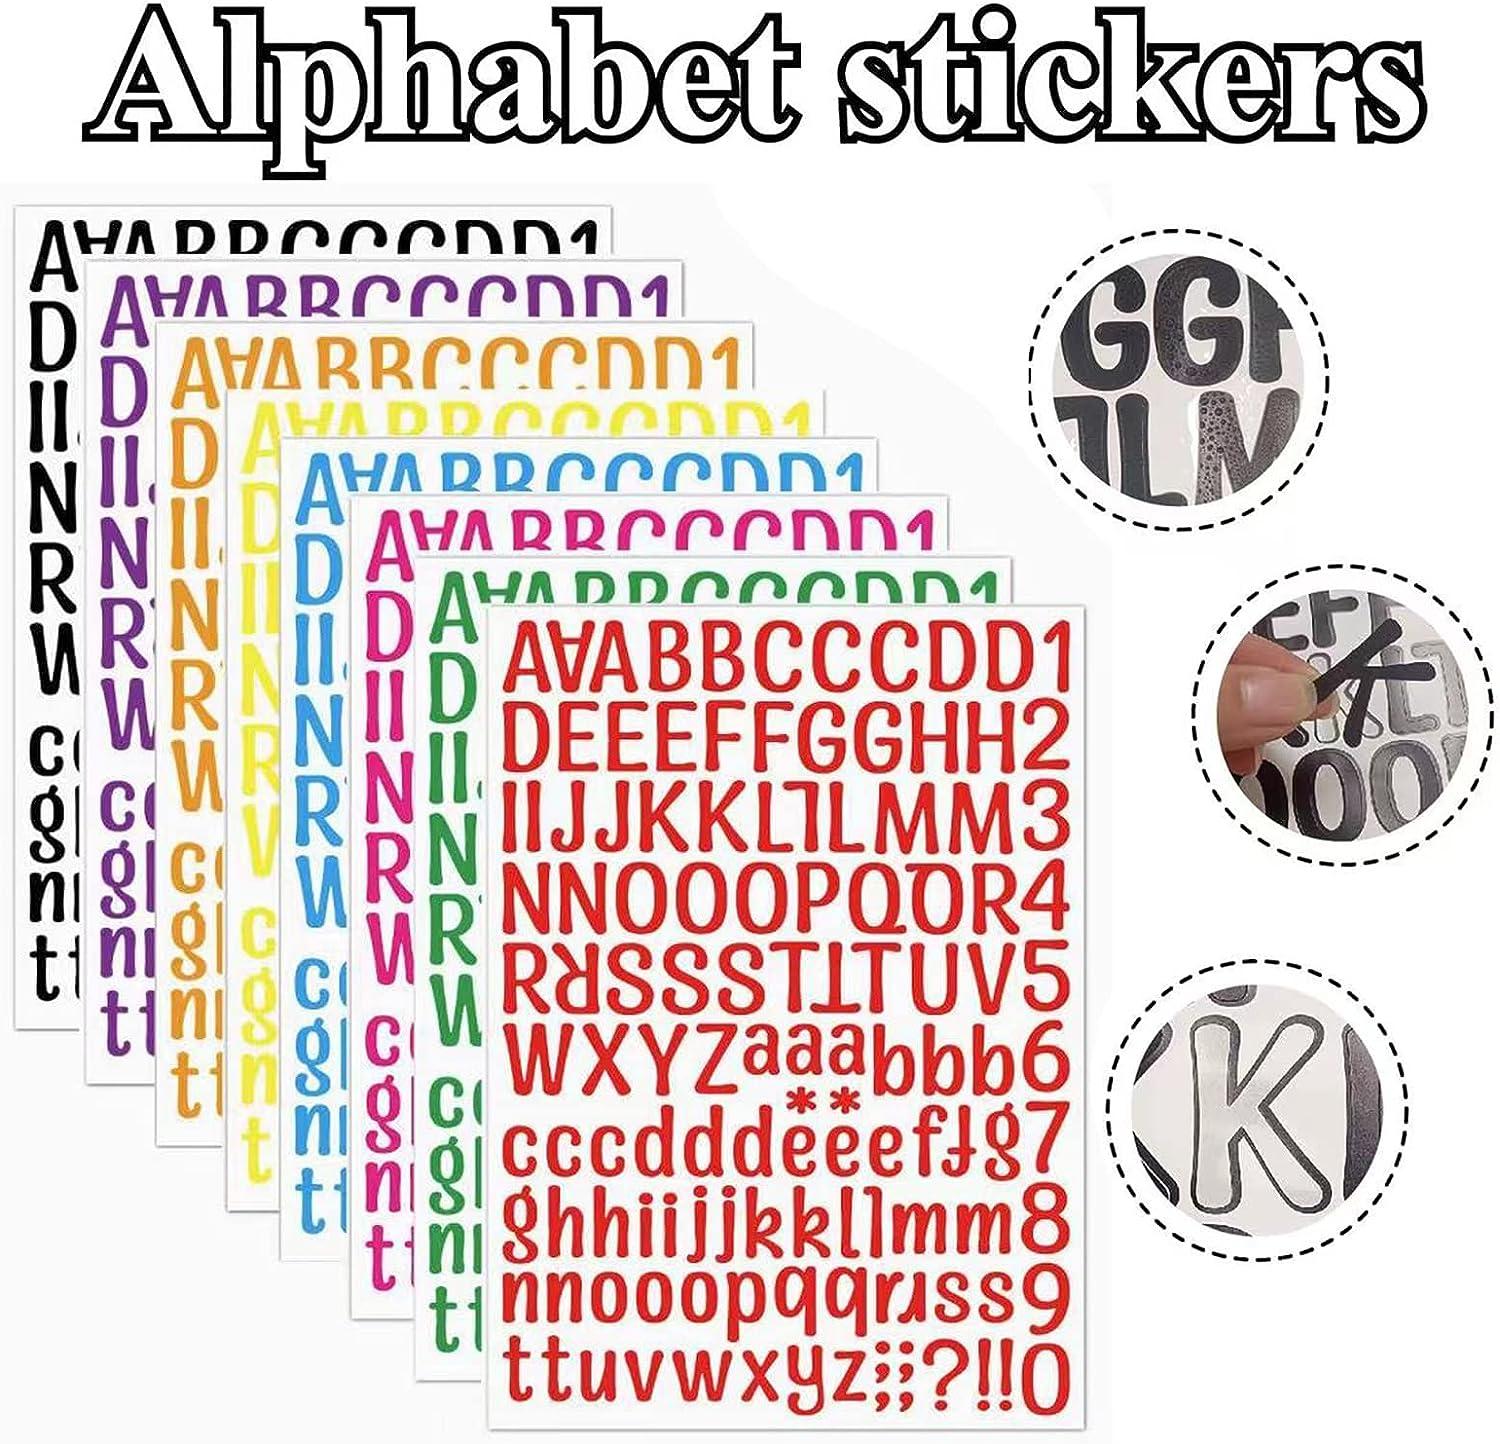 8 Sheets Letter Stickers 1008 Alphabet Stickers 1 inch Vinyl Self